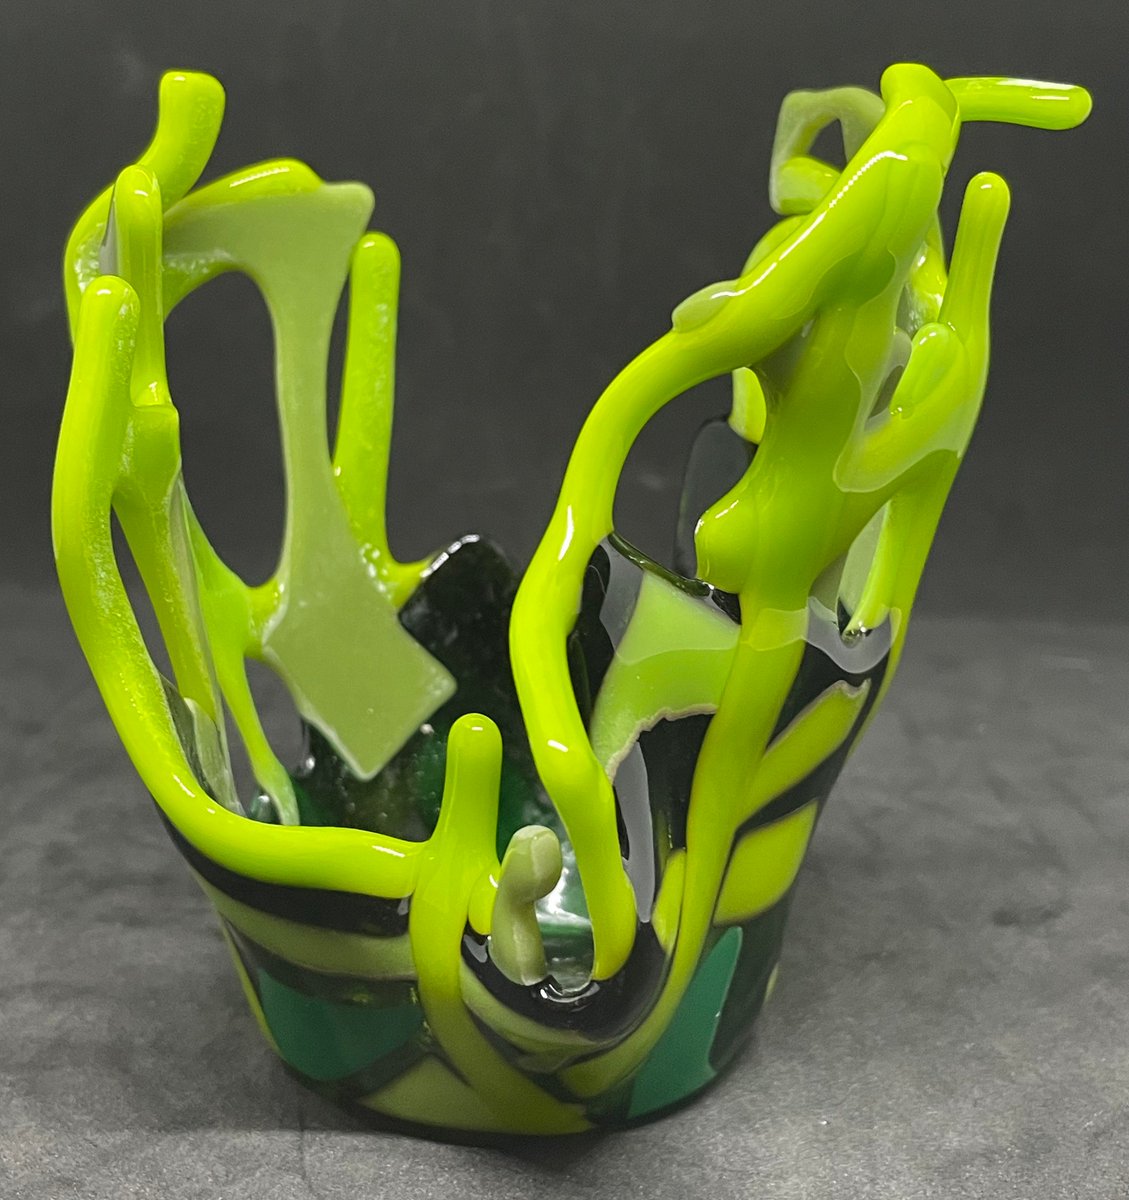 Green grass 2; fused glass art candleholder, multihued green etsy.me/3ozwFBX #green #fusedglass #veteranmade #madeinoklahoma #contemporarystyle #madeinusa #moderndesign #votivecandleholder #glasscandleholder